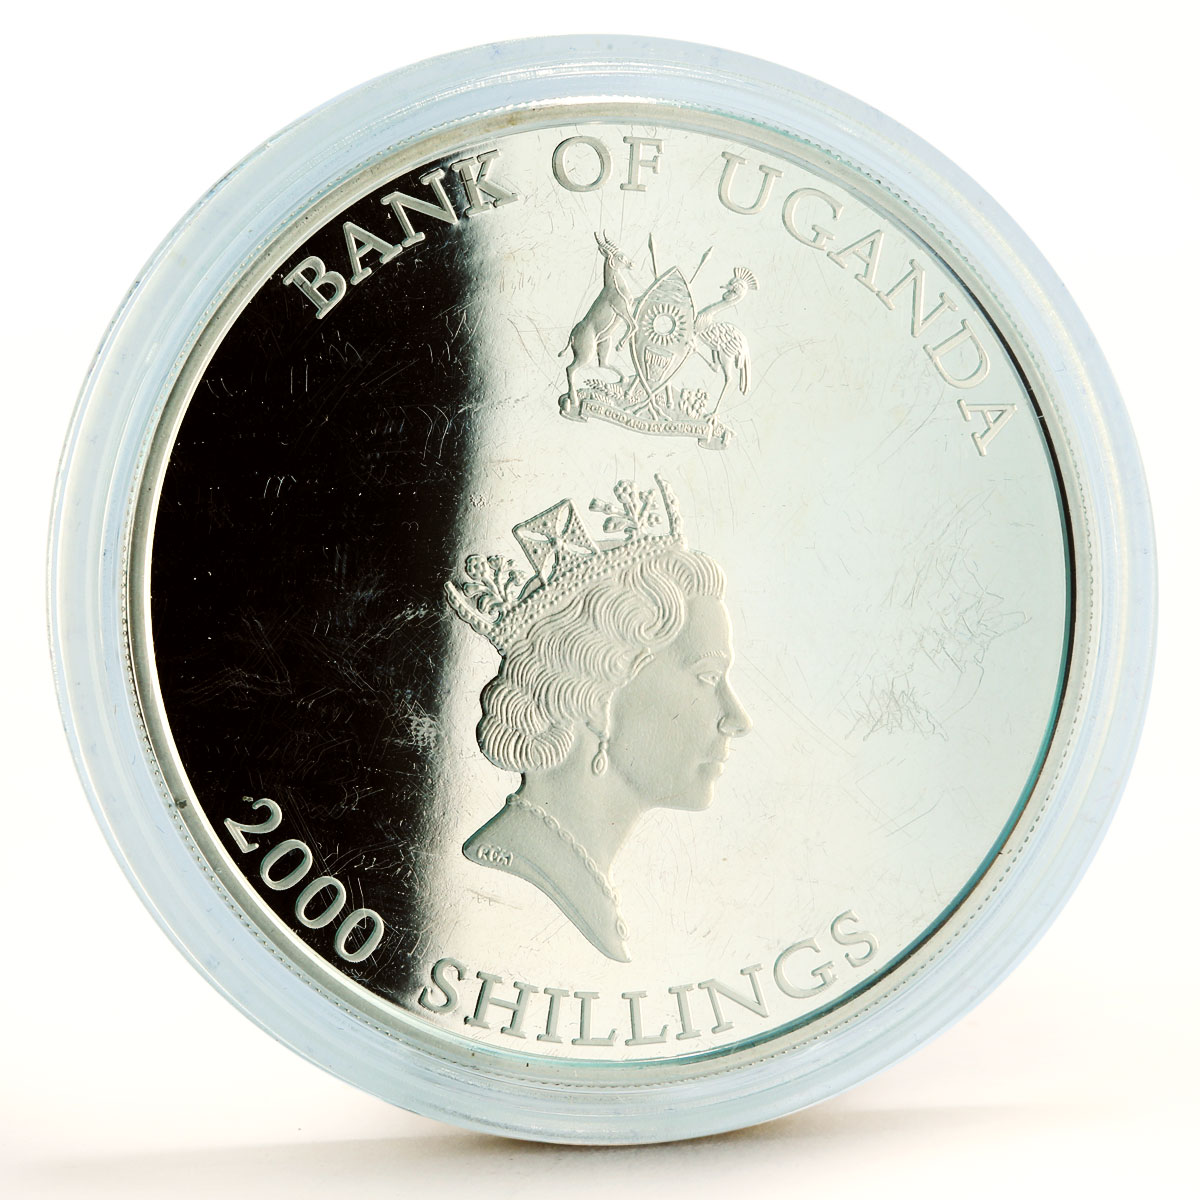 Uganda 2000 shillings Illusion Spirit Of the Mountain proof silver coin 2001